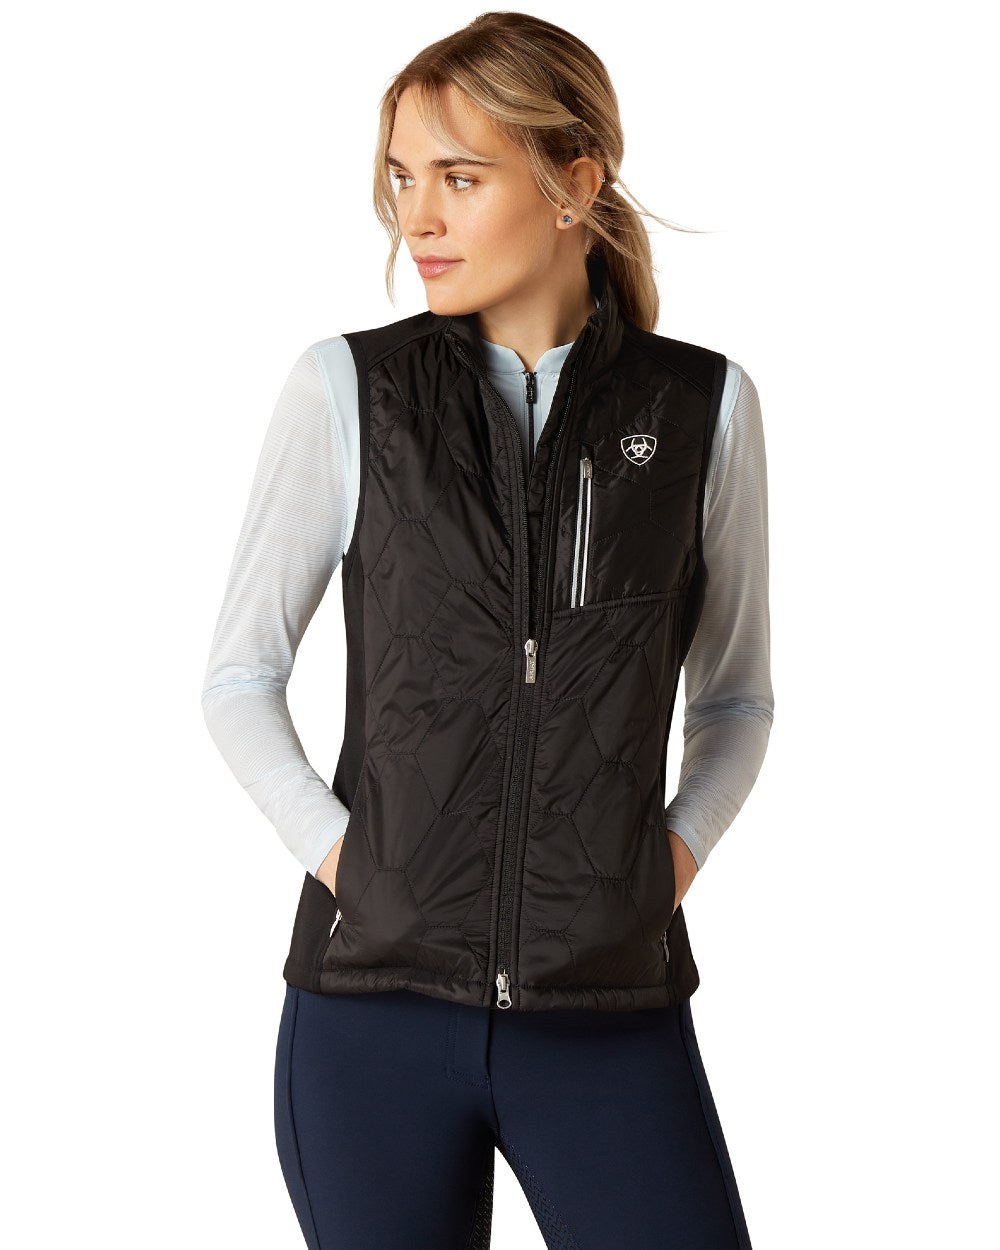 Black Coloured Ariat Womens Fusion Insulated Vest On A White Background 